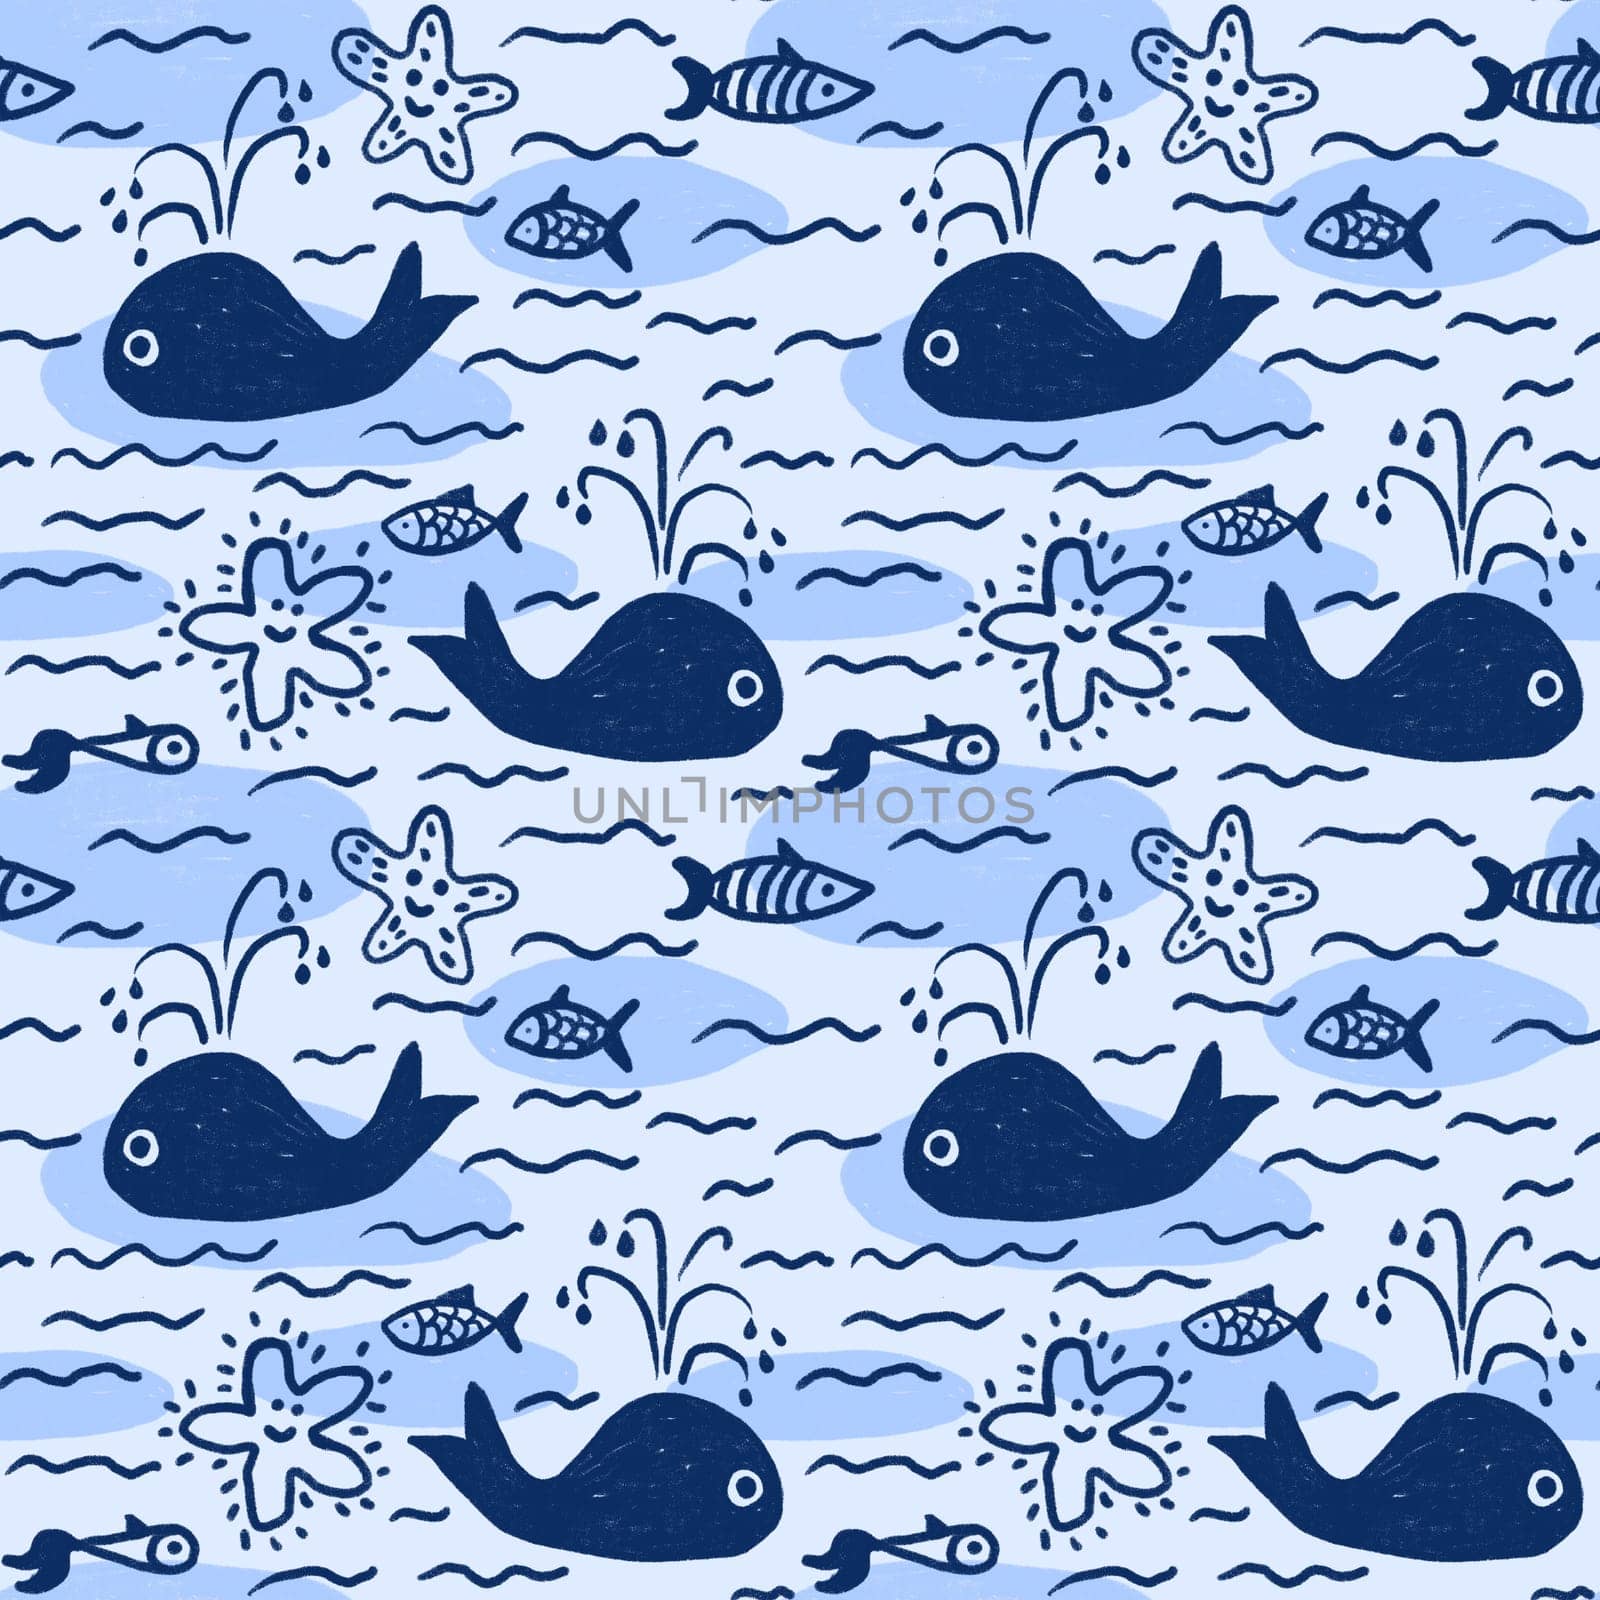 Hand drawn seamless pattern with blue whales waves sea ocea. Cute funny print for kids children nursery design, zoo wildlife simple minimalist fabric for boys, mammal fish water art. by Lagmar